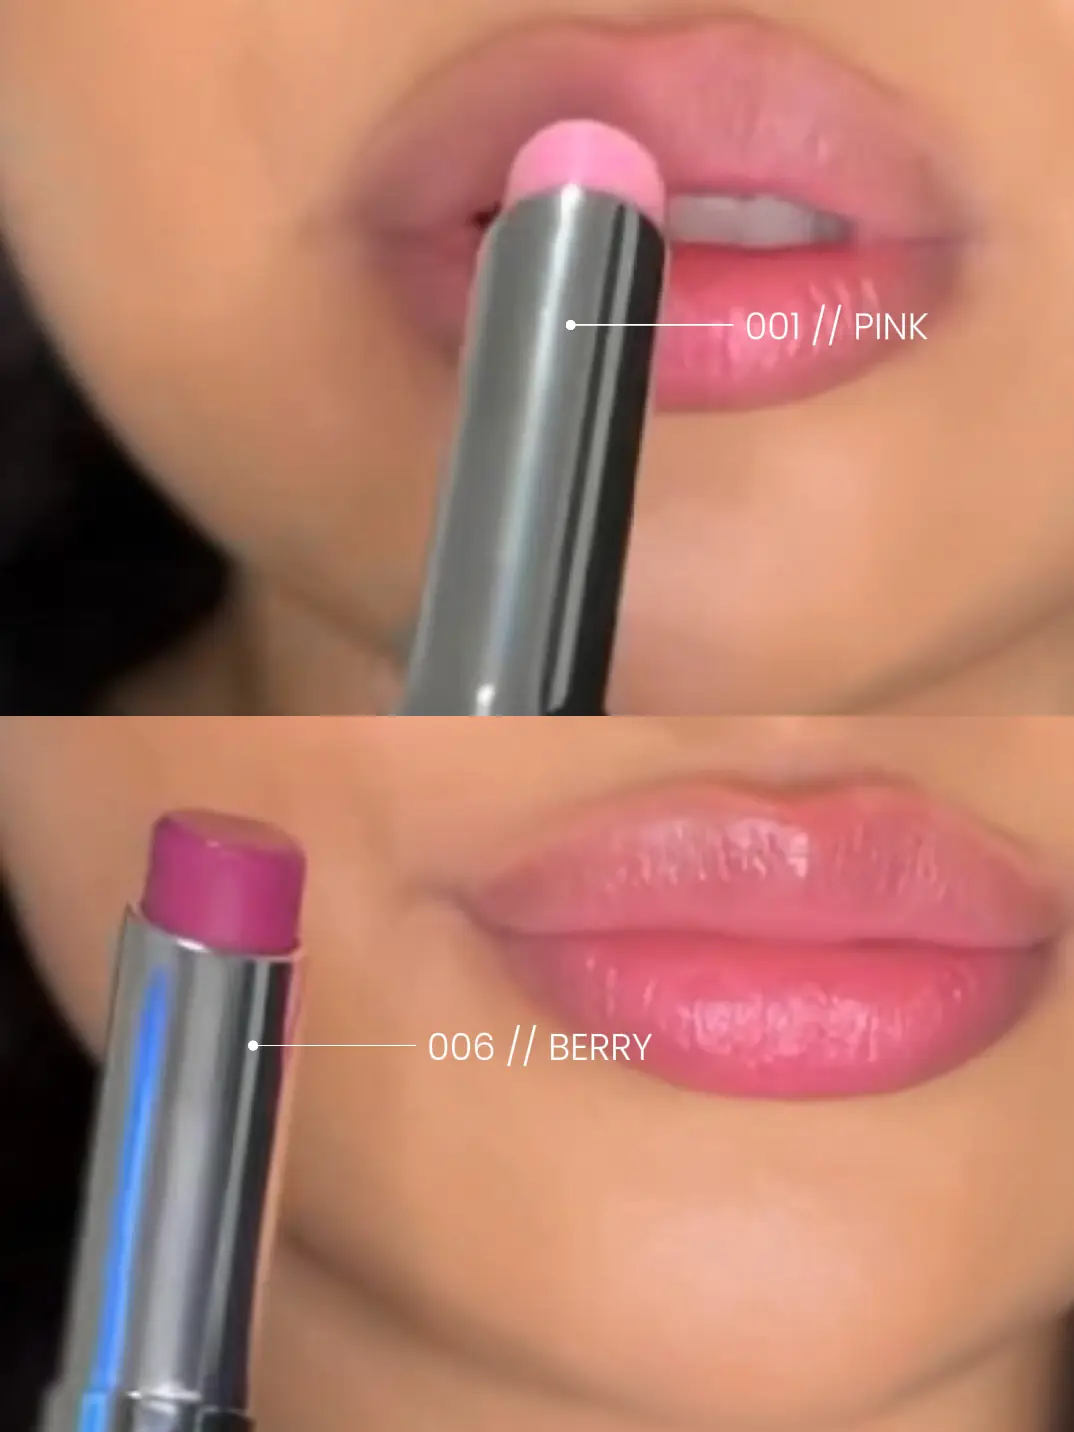 FAVE DIOR LIP BALM SHADES, Gallery posted by paulanicolie